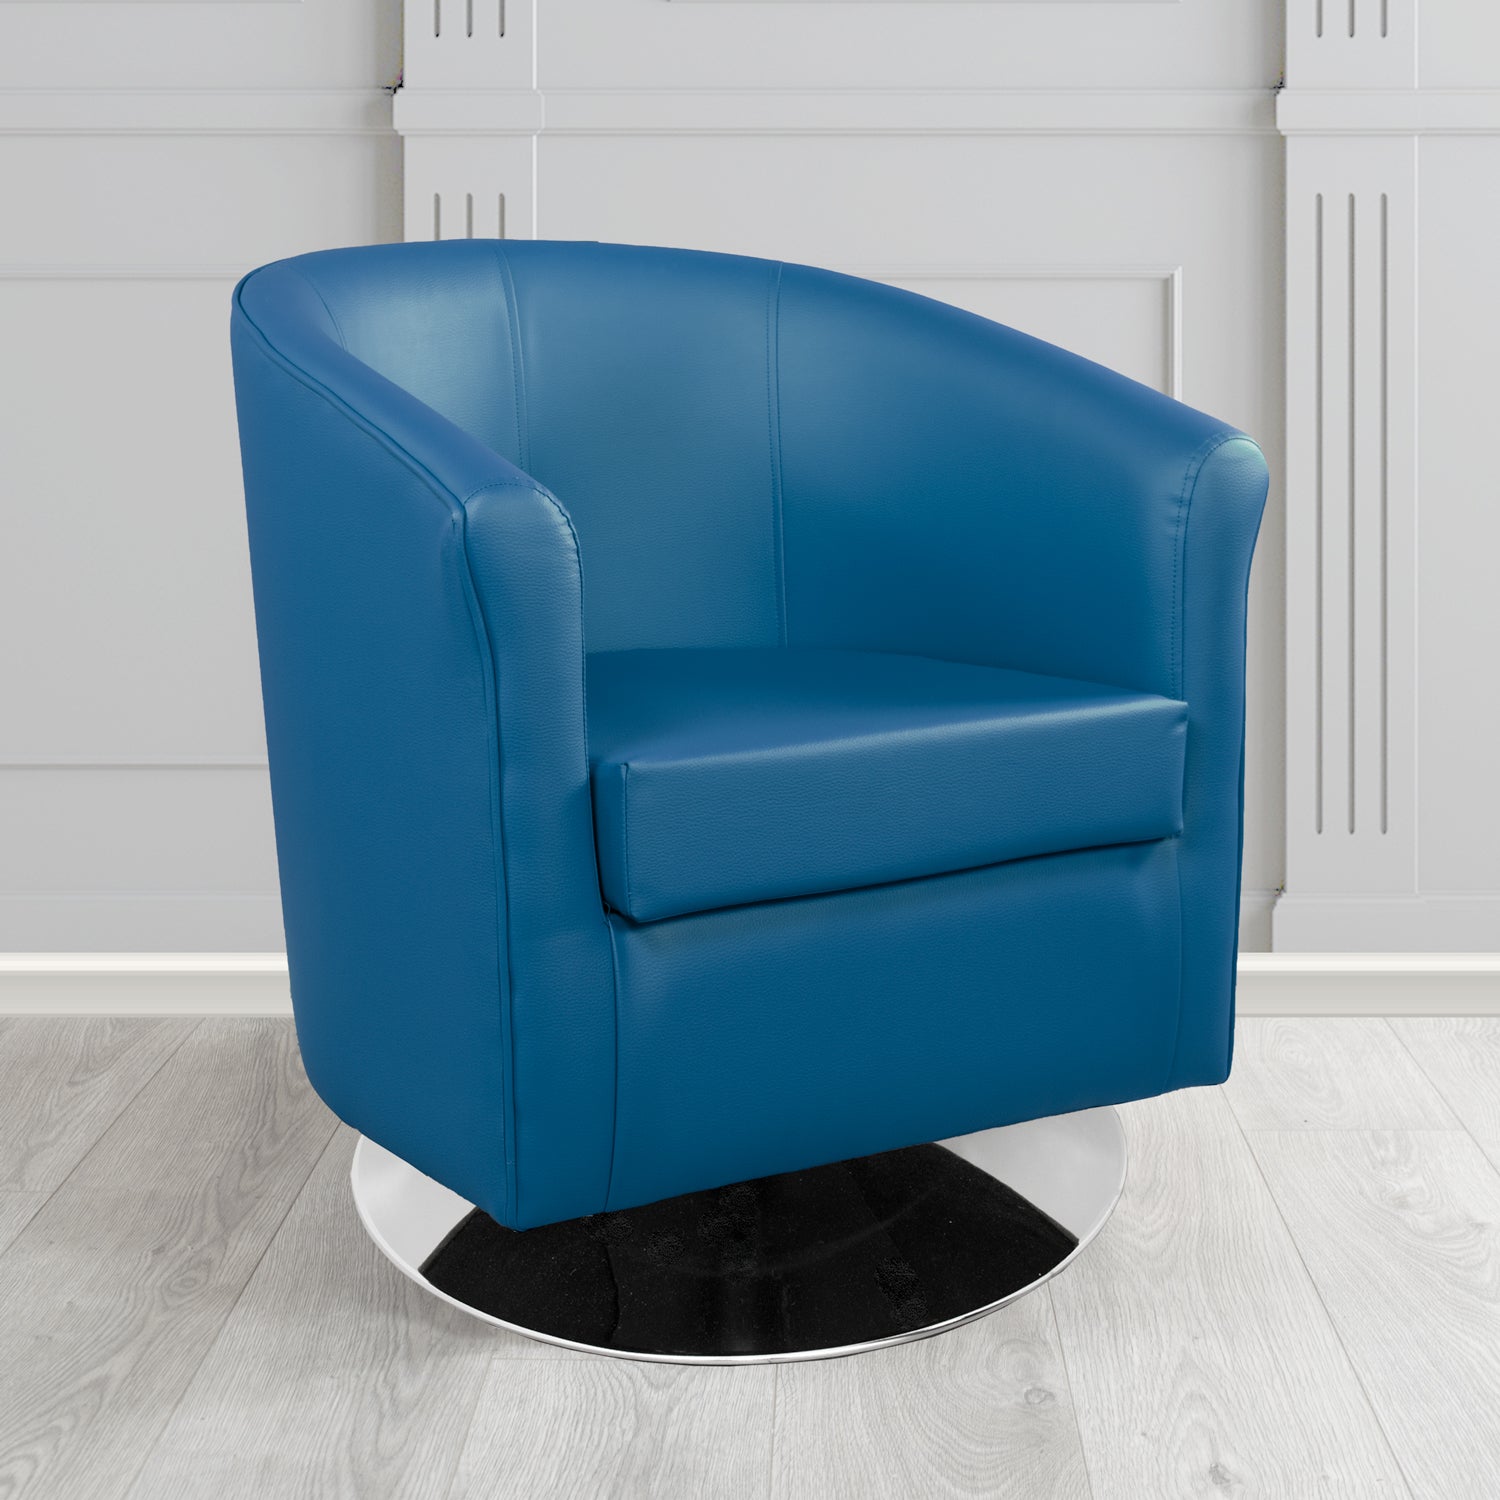 Tuscany Swivel Tub Chair in Madrid Royal Faux Leather - The Tub Chair Shop